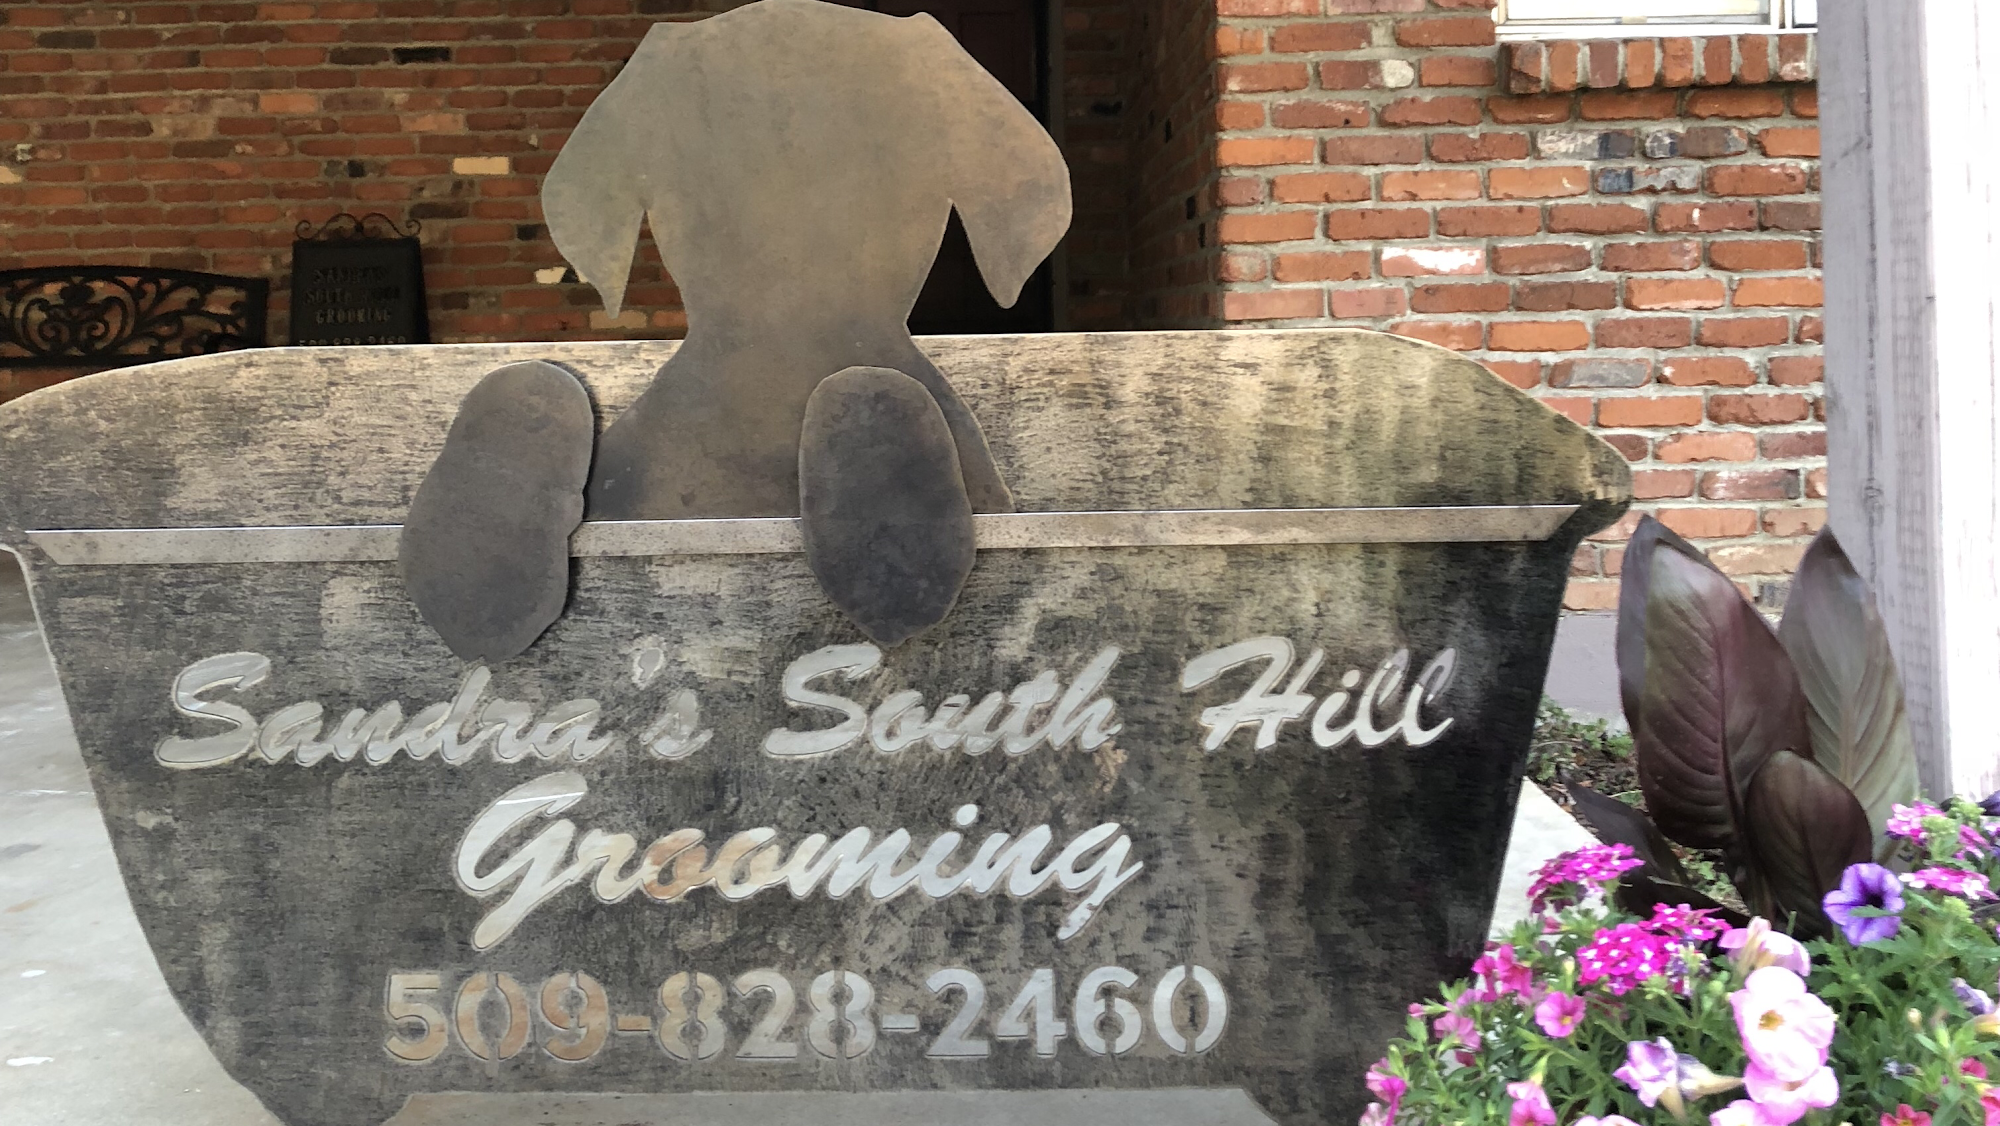 Sandra’s South Hill Grooming